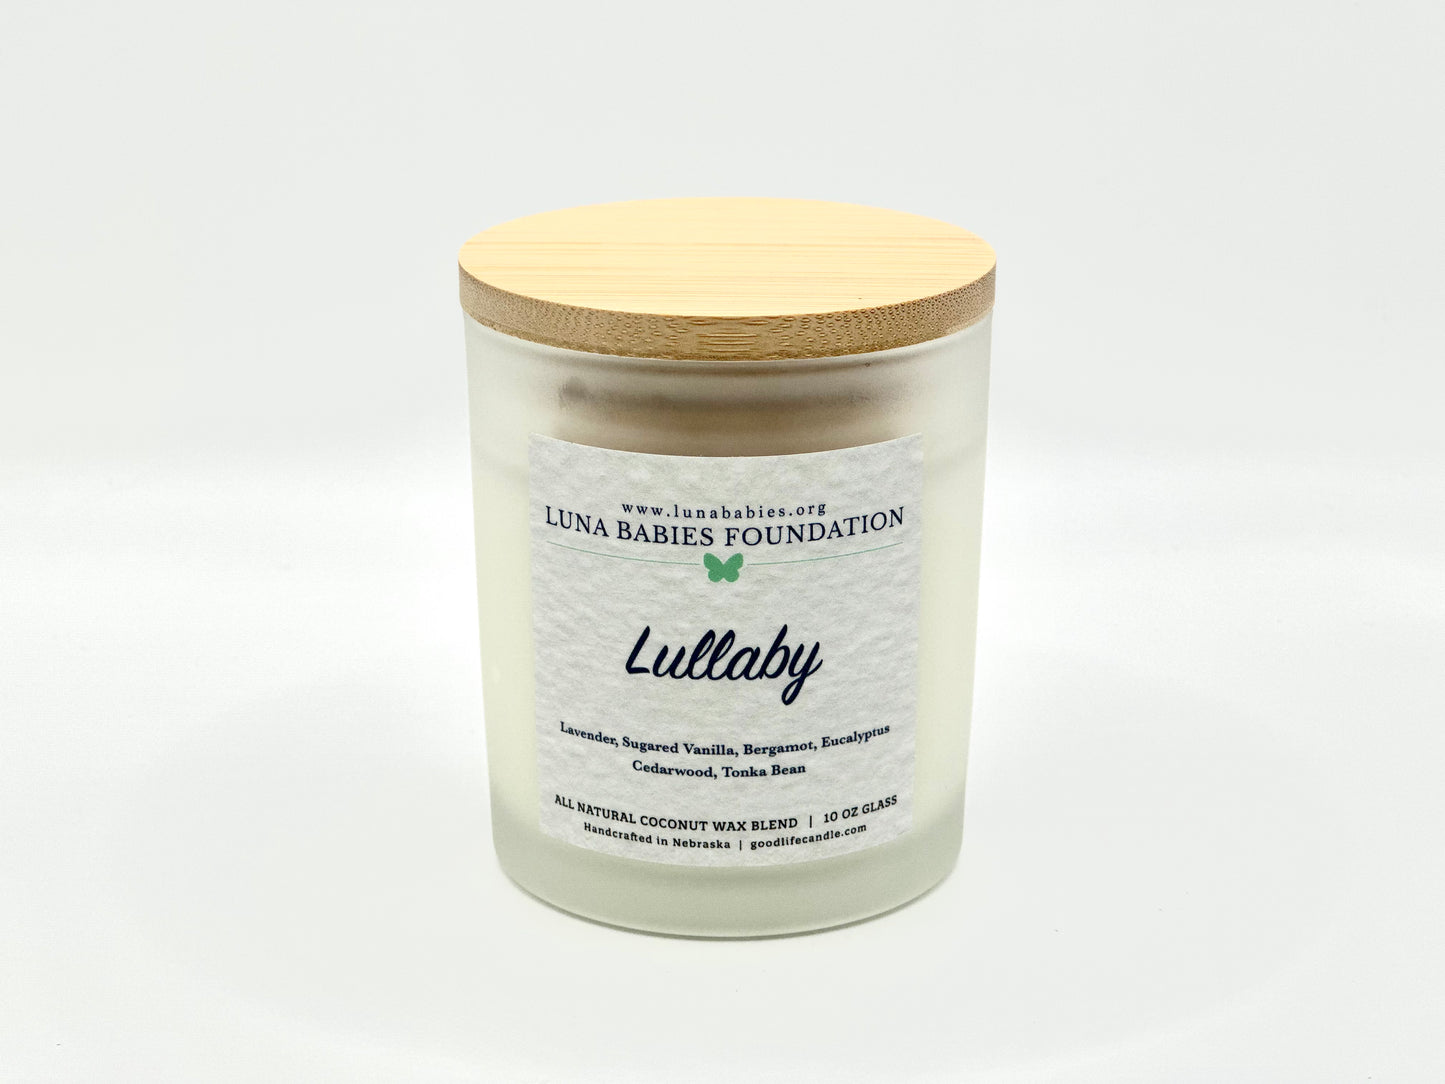 Lullaby Scented Candle - In Partnership with the Luna Babies Foundation